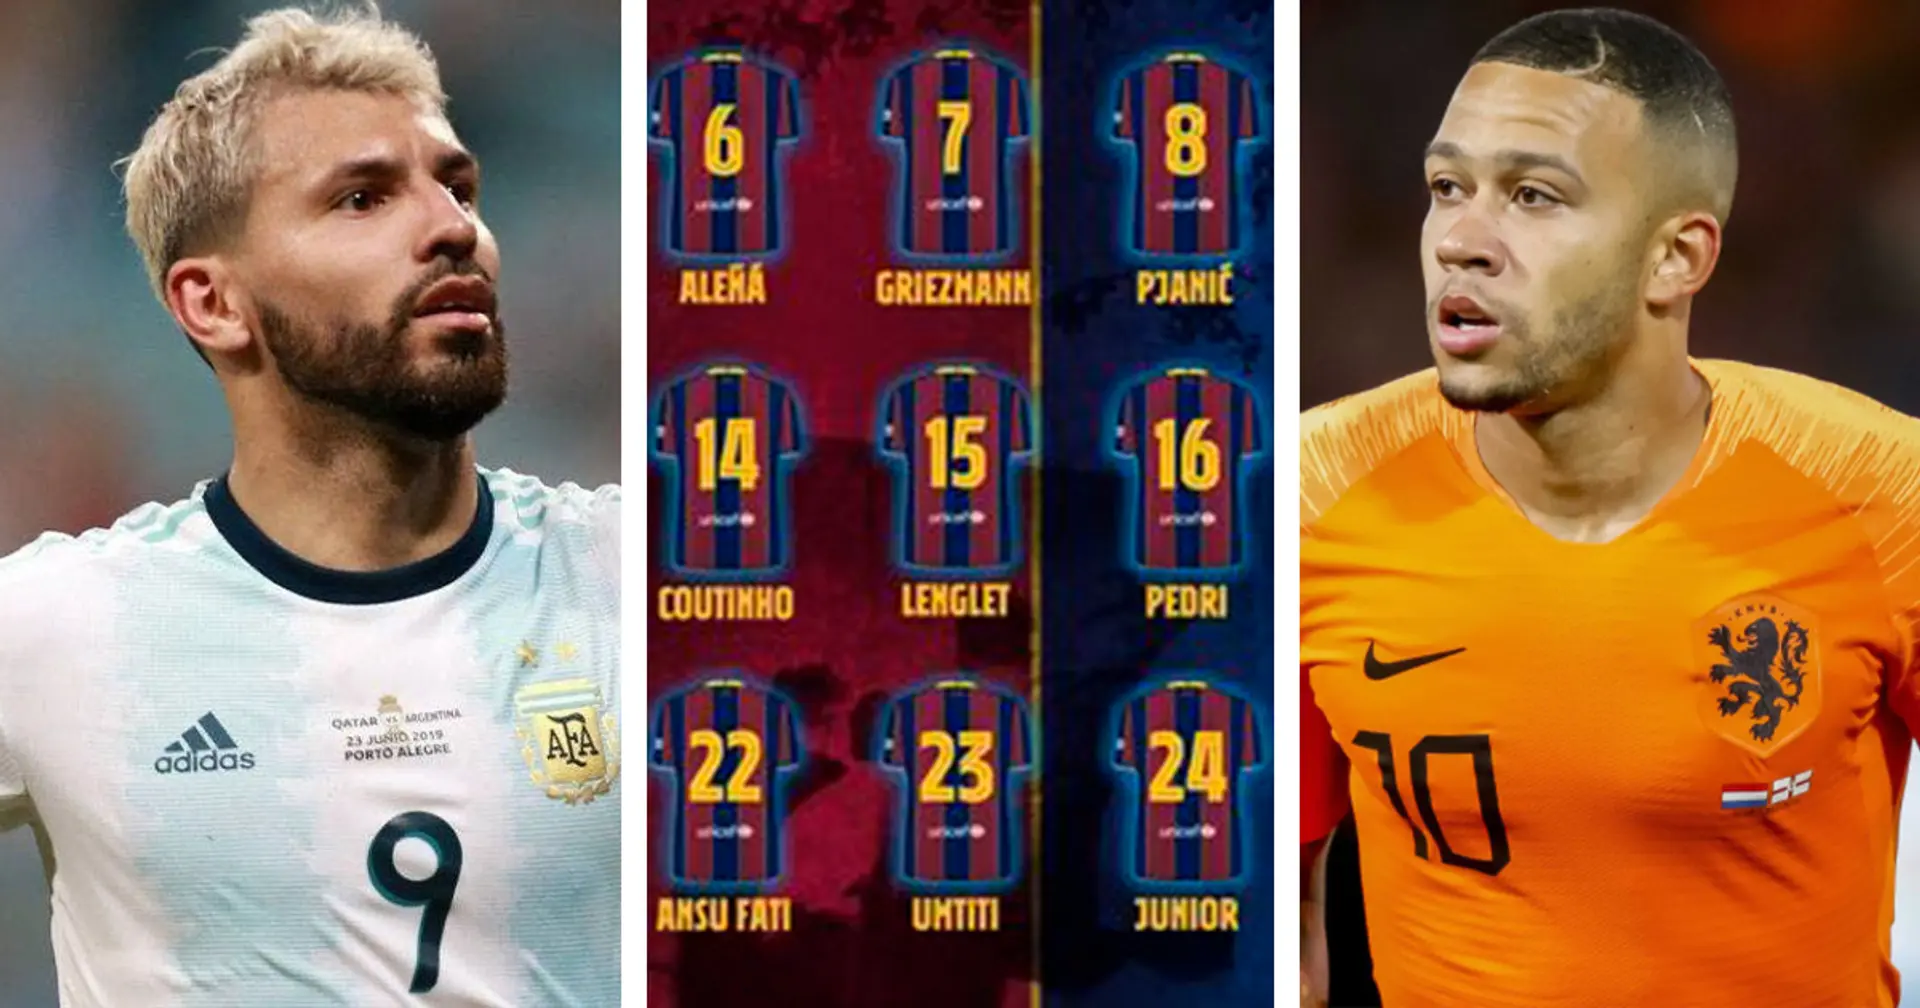 6 'attractive' squad numbers Barca could offer to potential newcomers